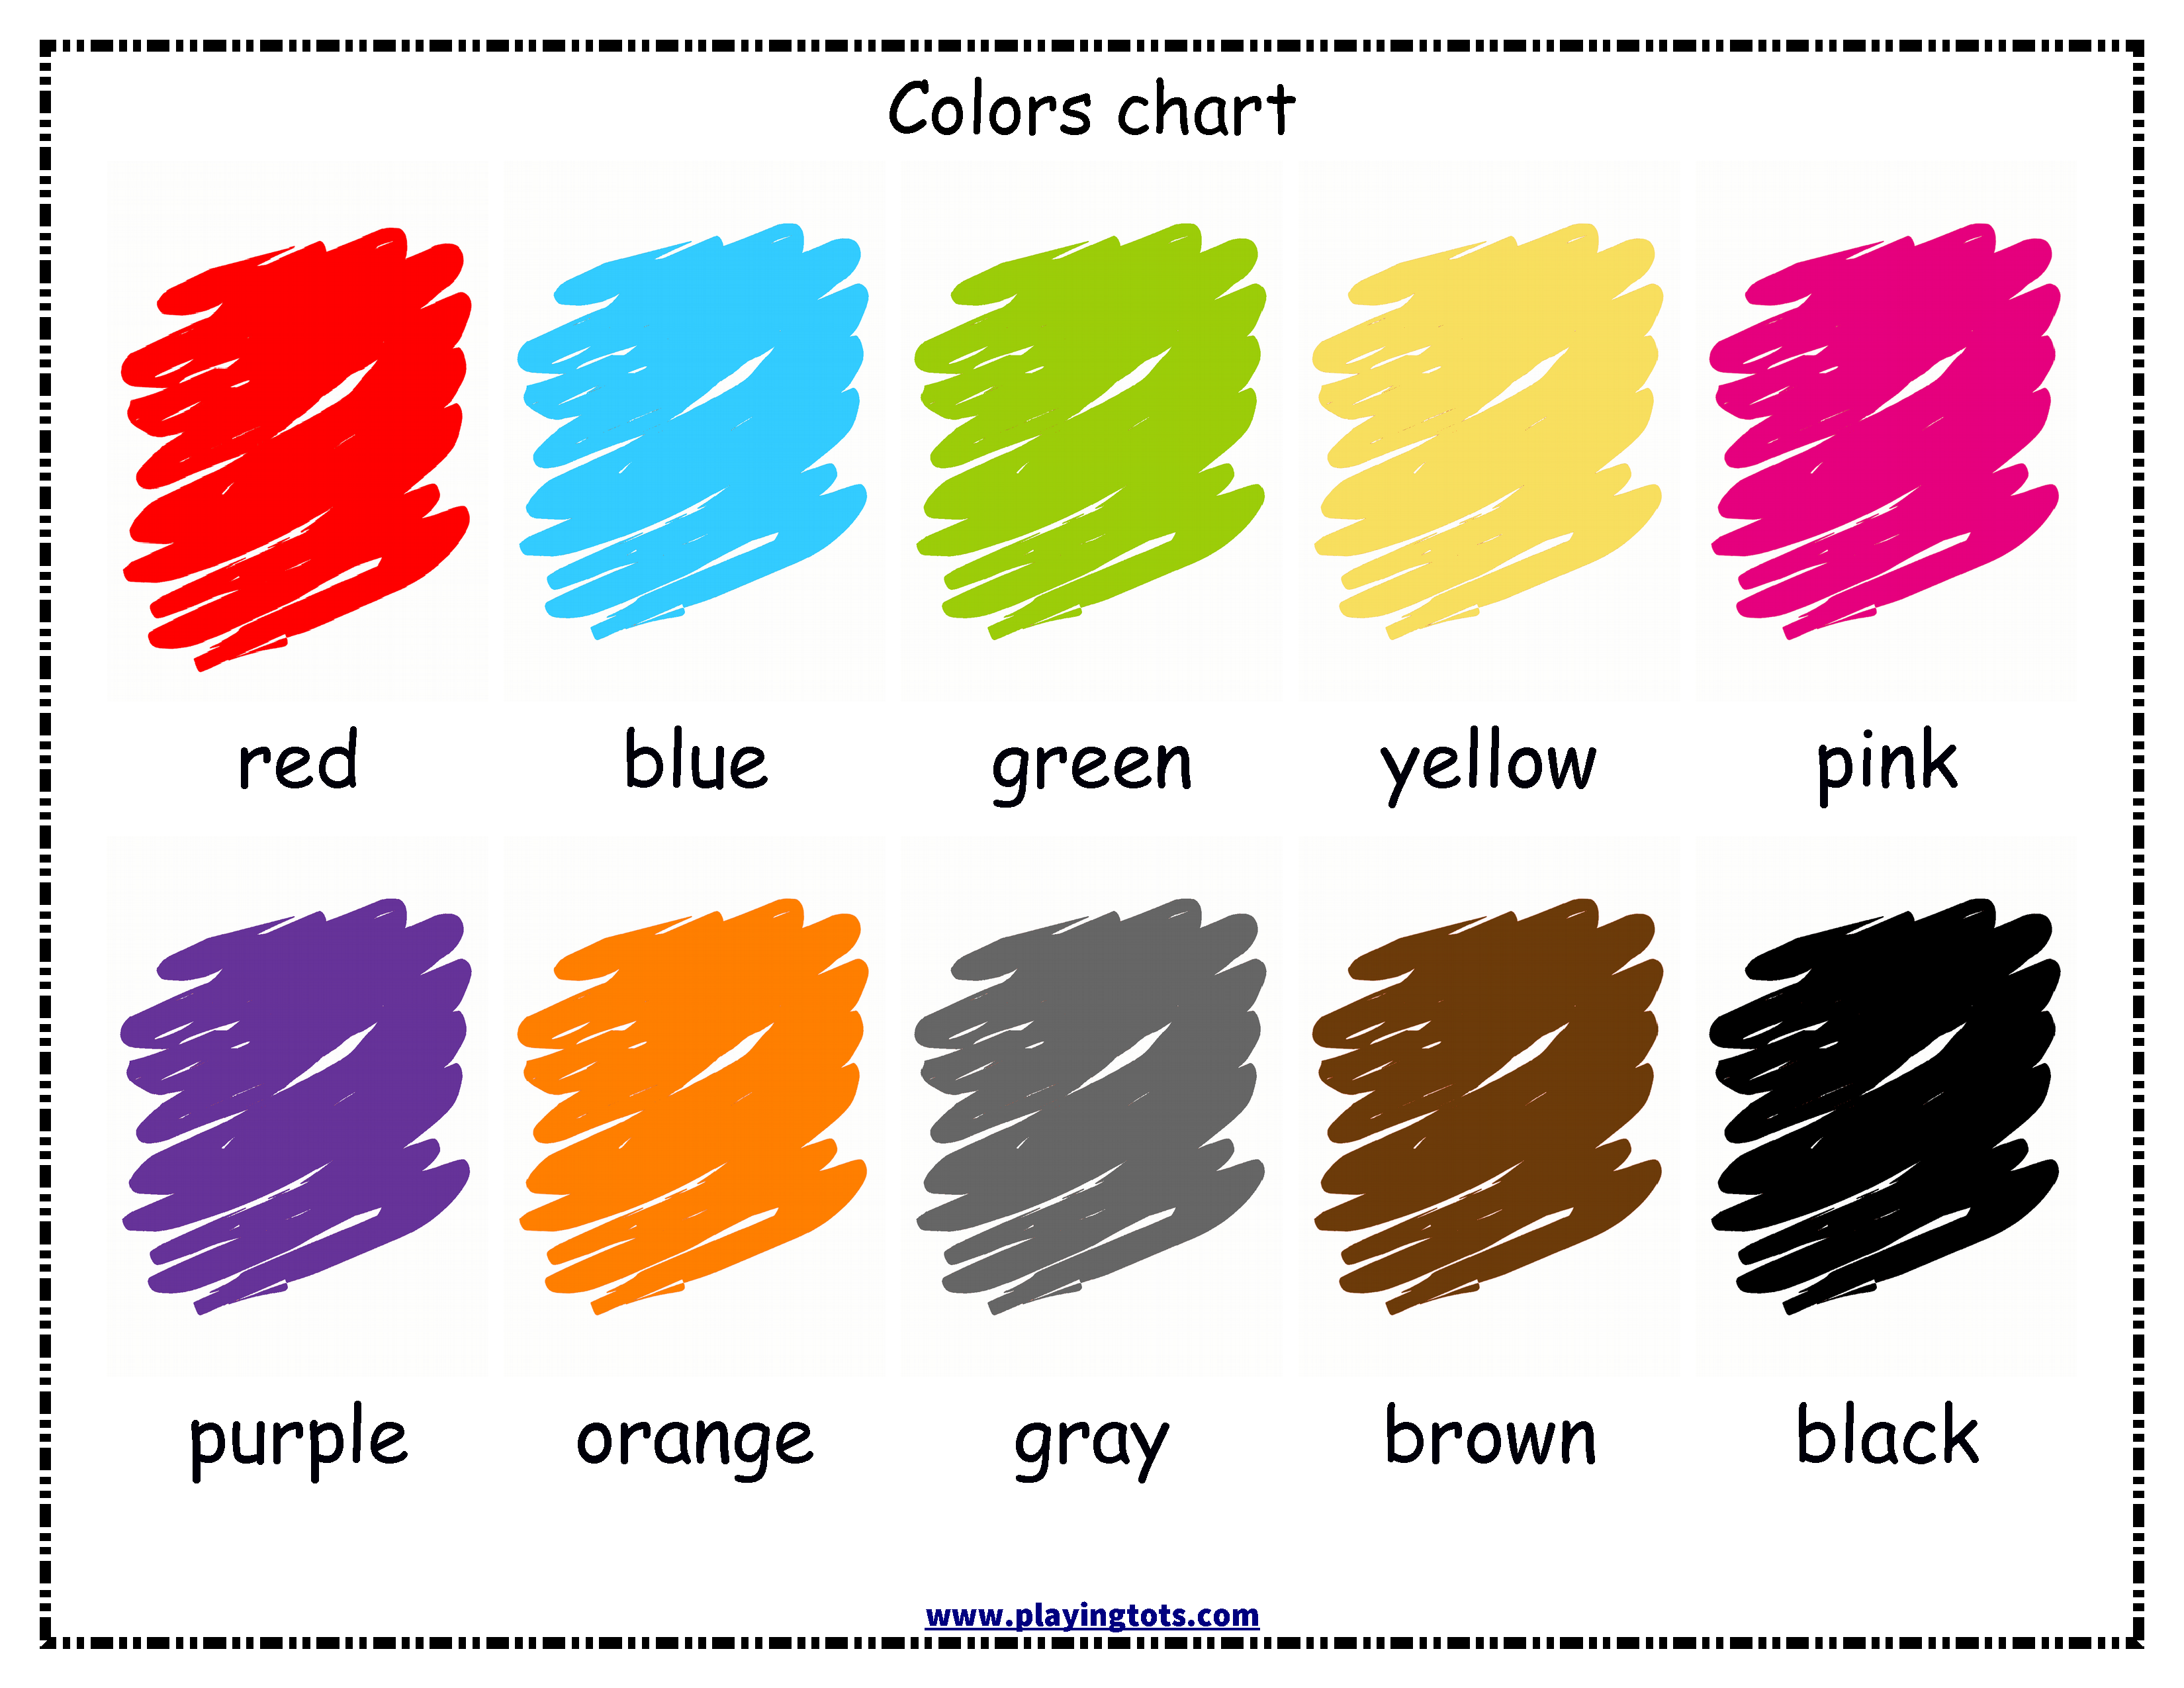 free printable colors chart for your toddler keywords: free 